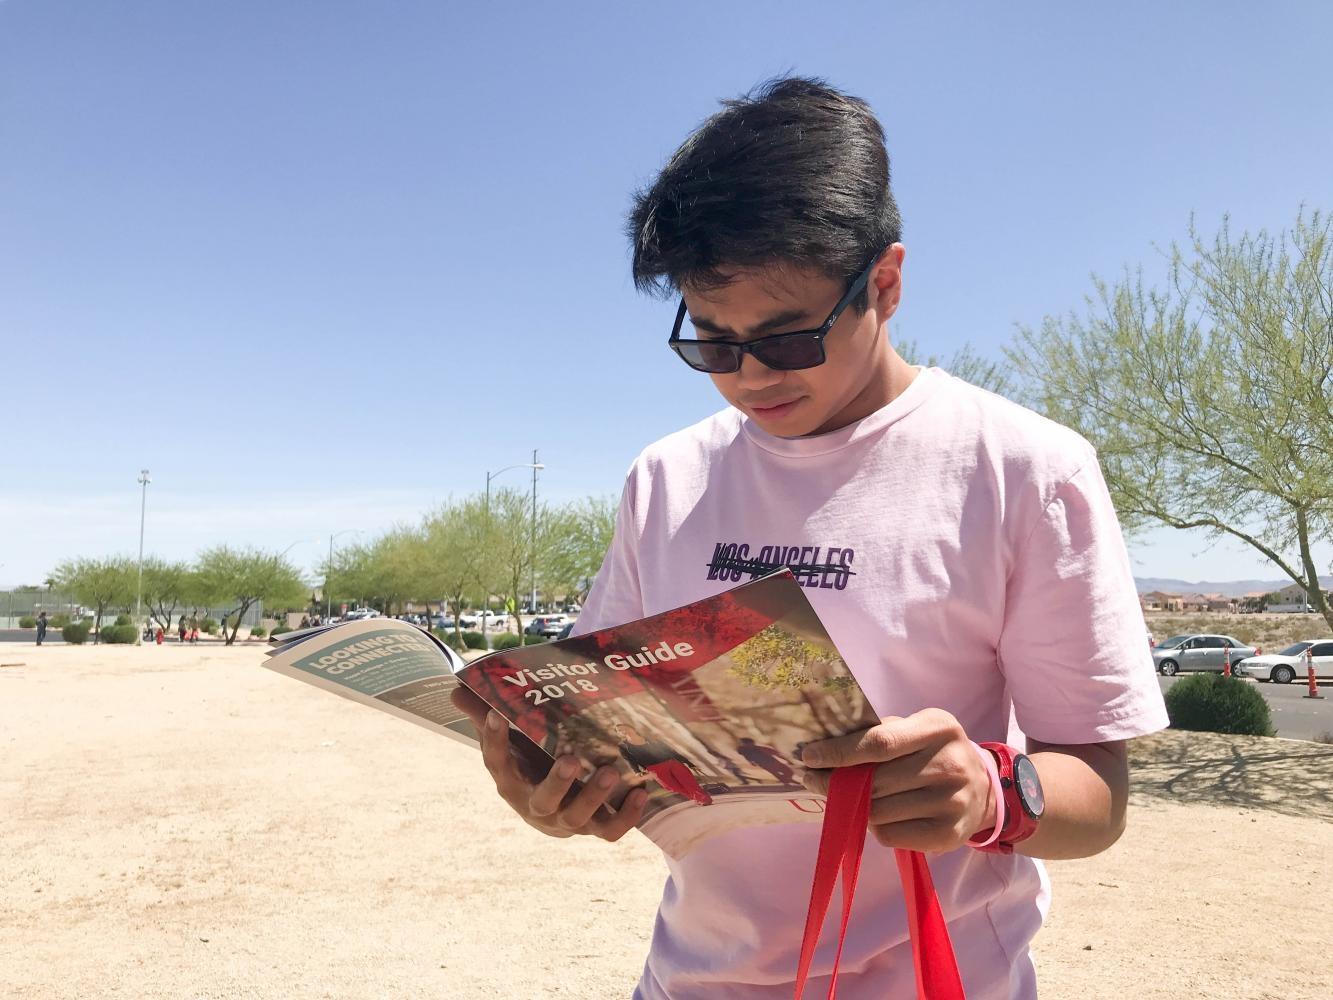 College admission process explained during tour of UNLV campus